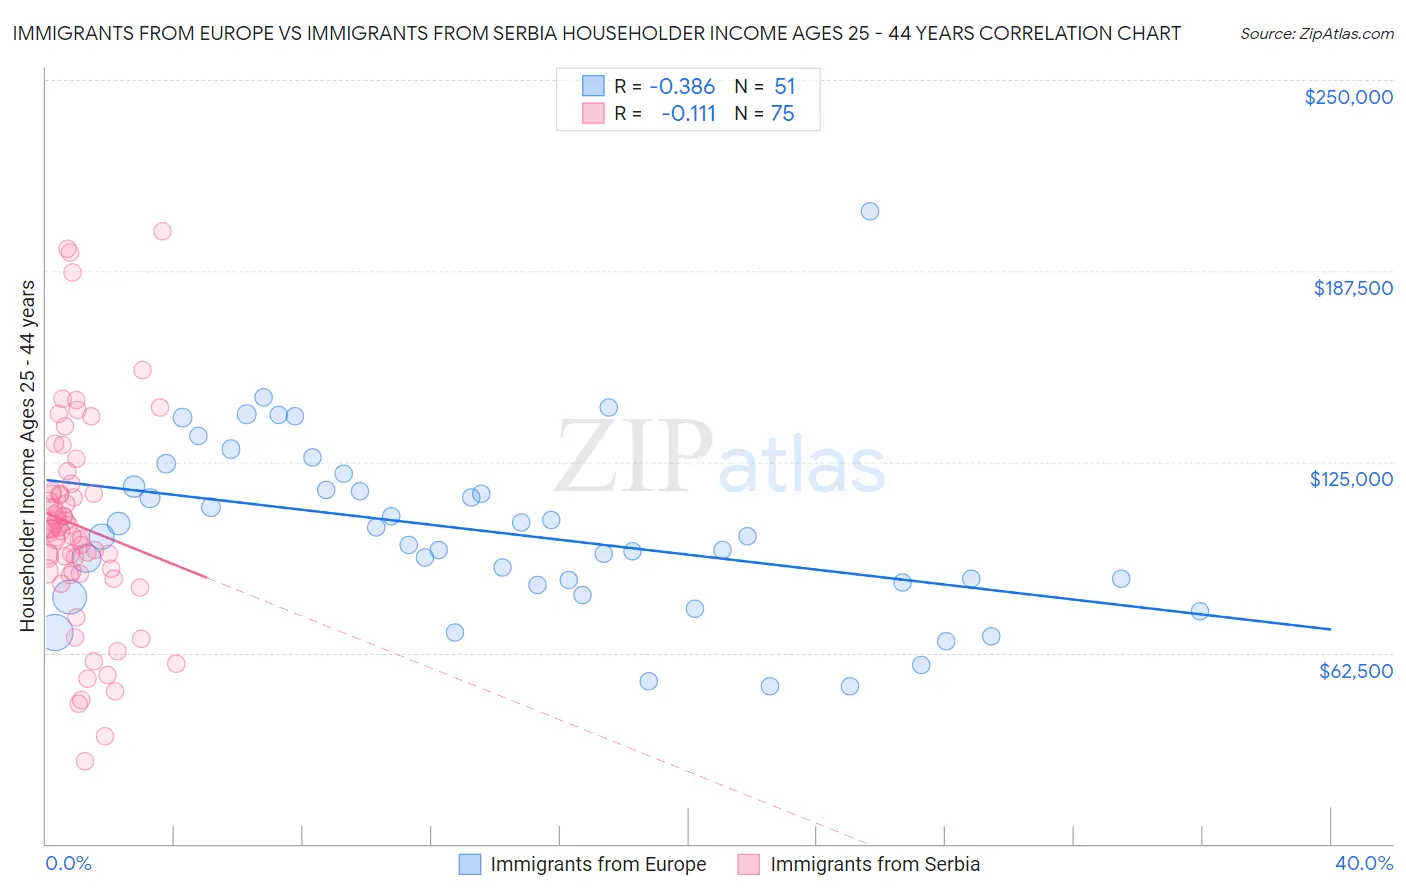 Immigrants from Europe vs Immigrants from Serbia Householder Income Ages 25 - 44 years